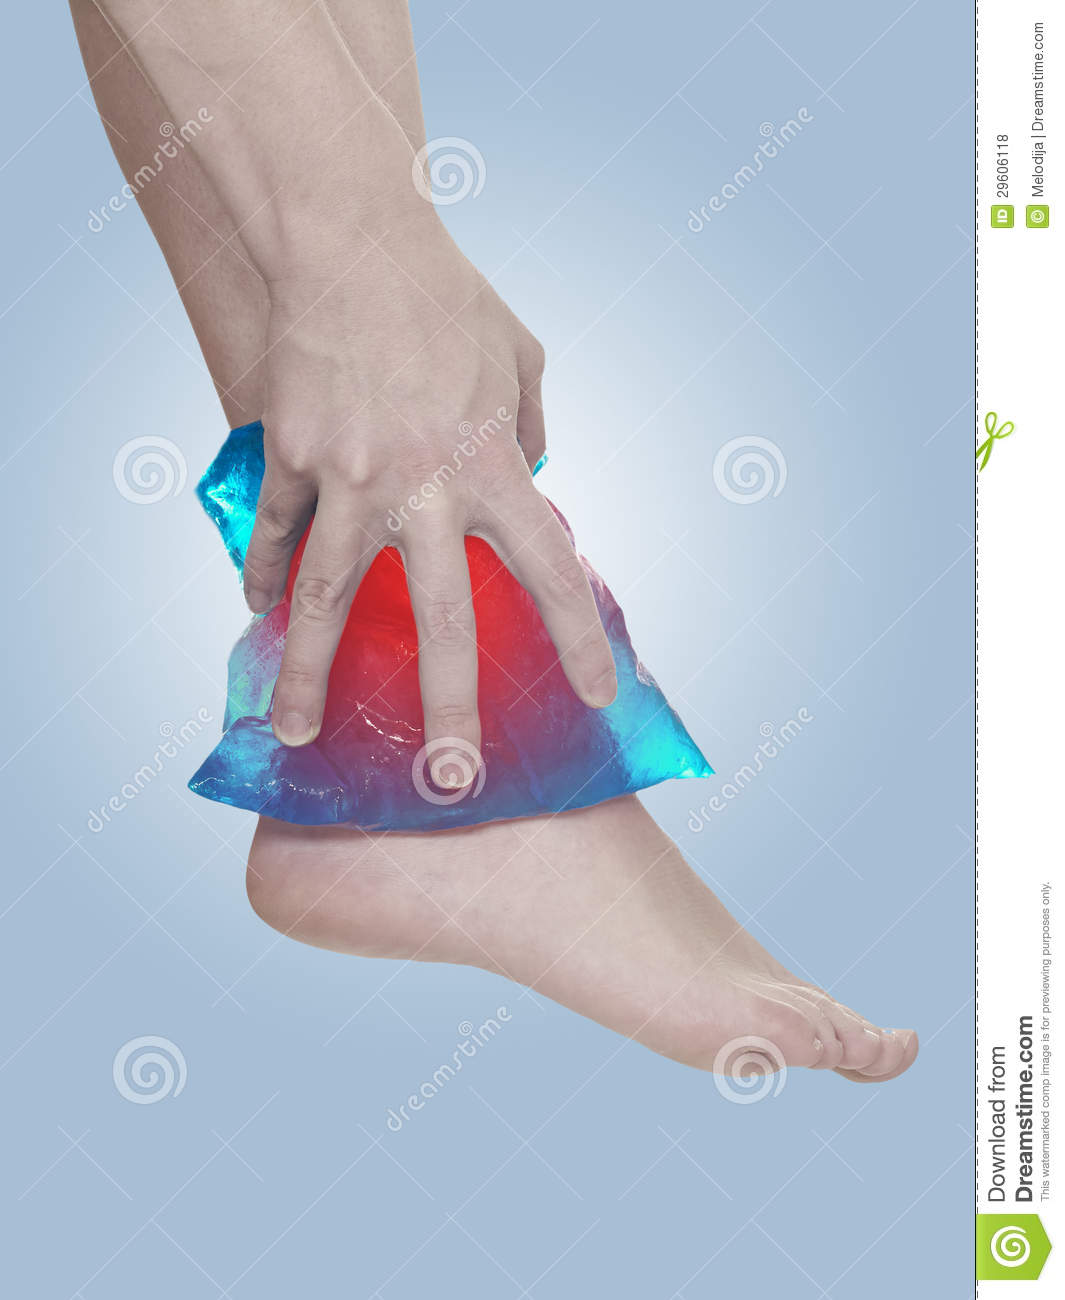 Cool Gel Pack On A Swollen Hurting Ankle  Royalty Free Stock Photos    